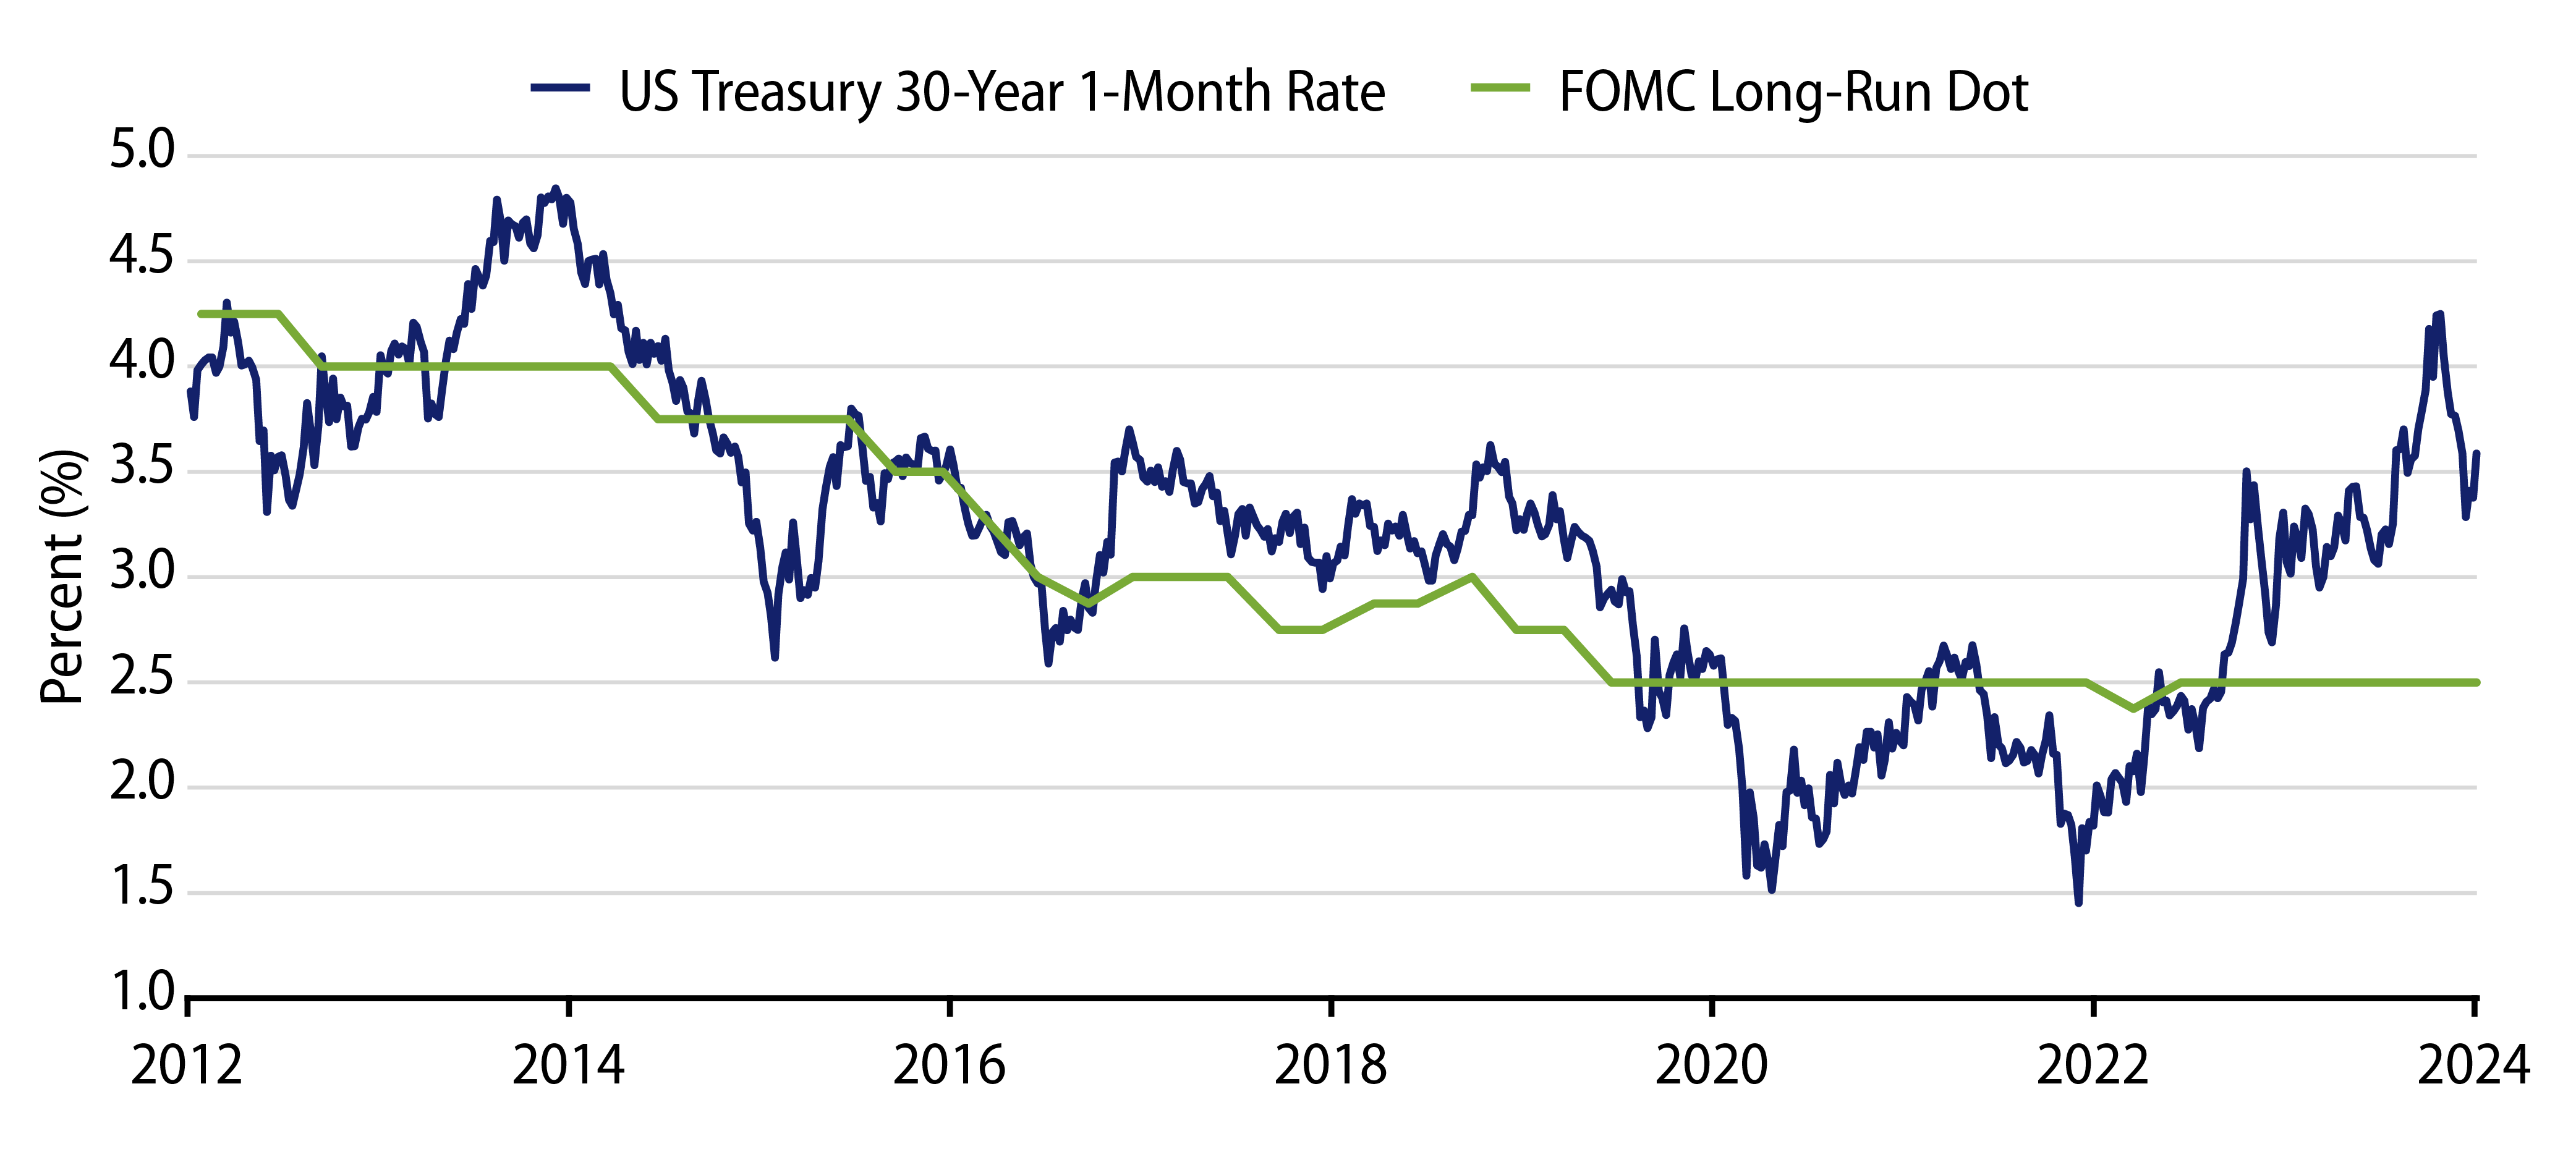 Forward Curve for 30-Year UST Rates Relative to Fed Funds Rate Estimates